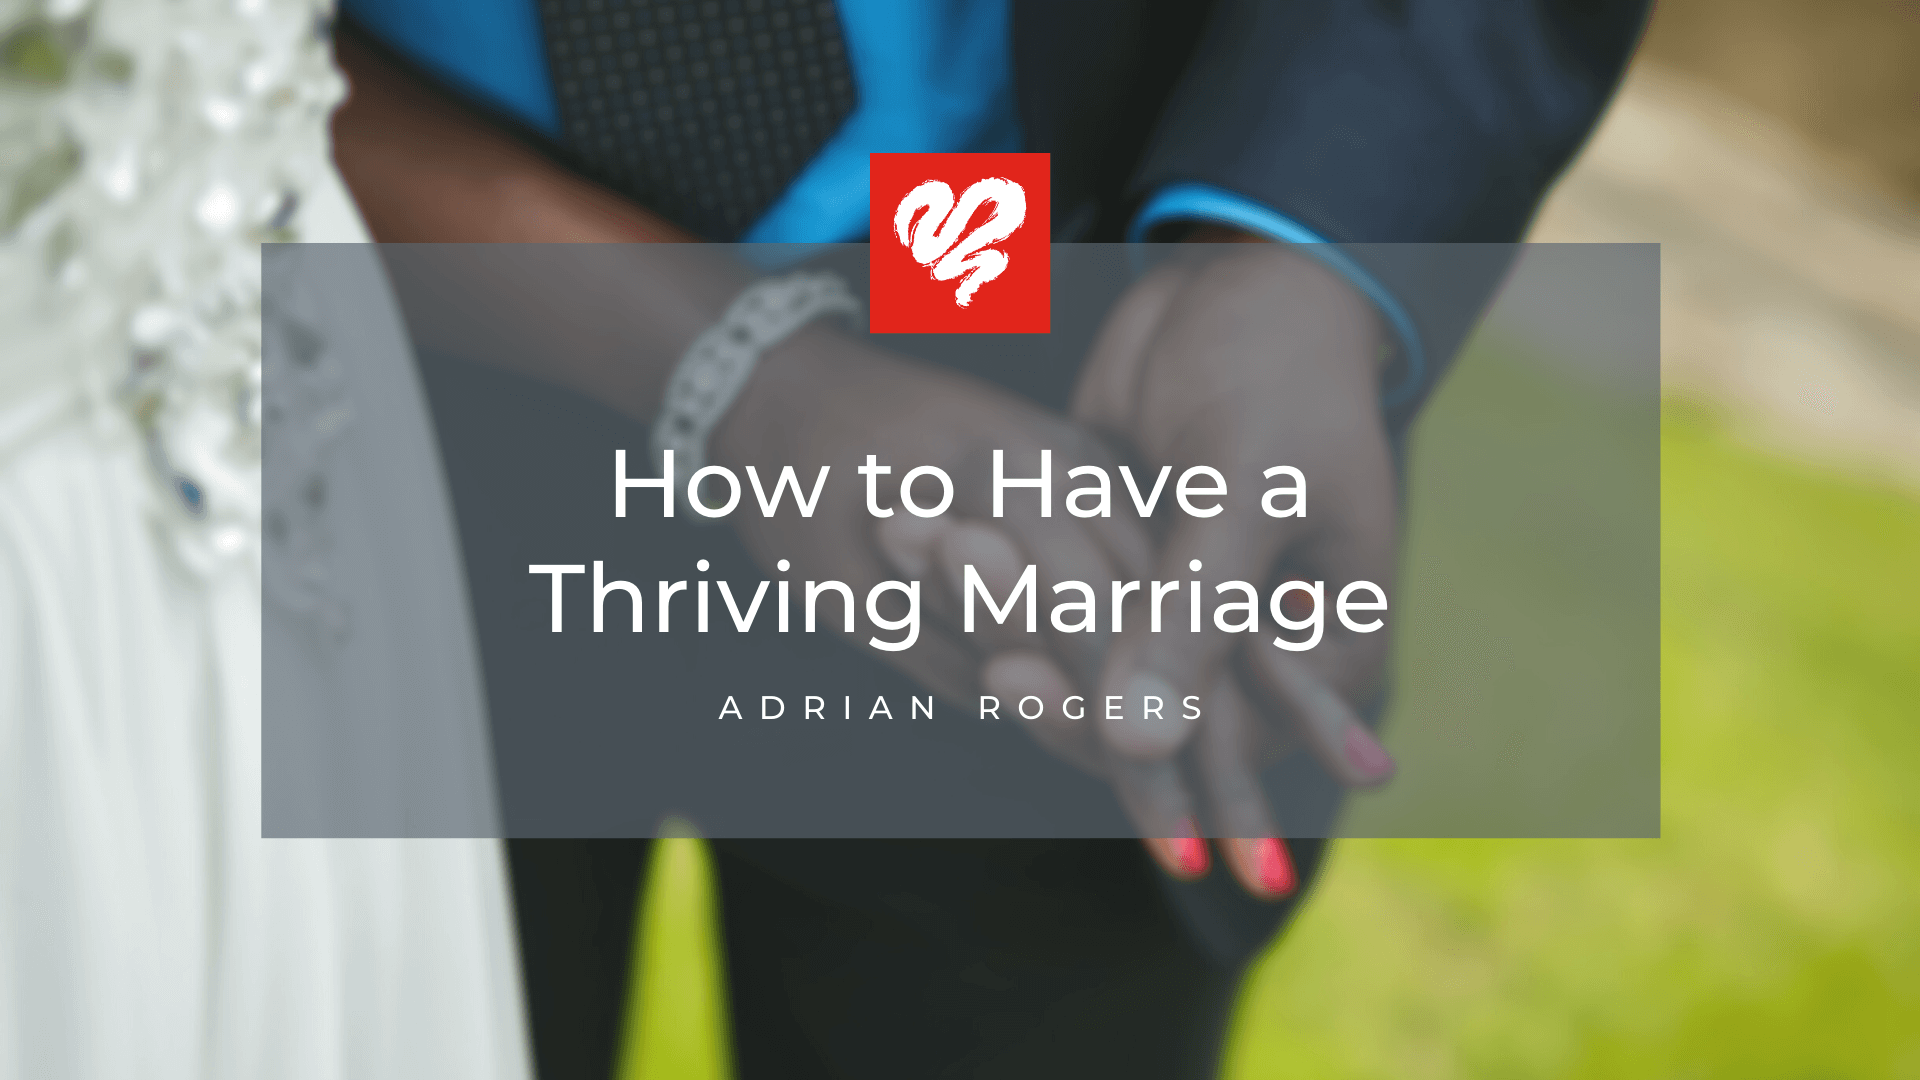 How to Have a Thriving Marriage 1954 1920x1080